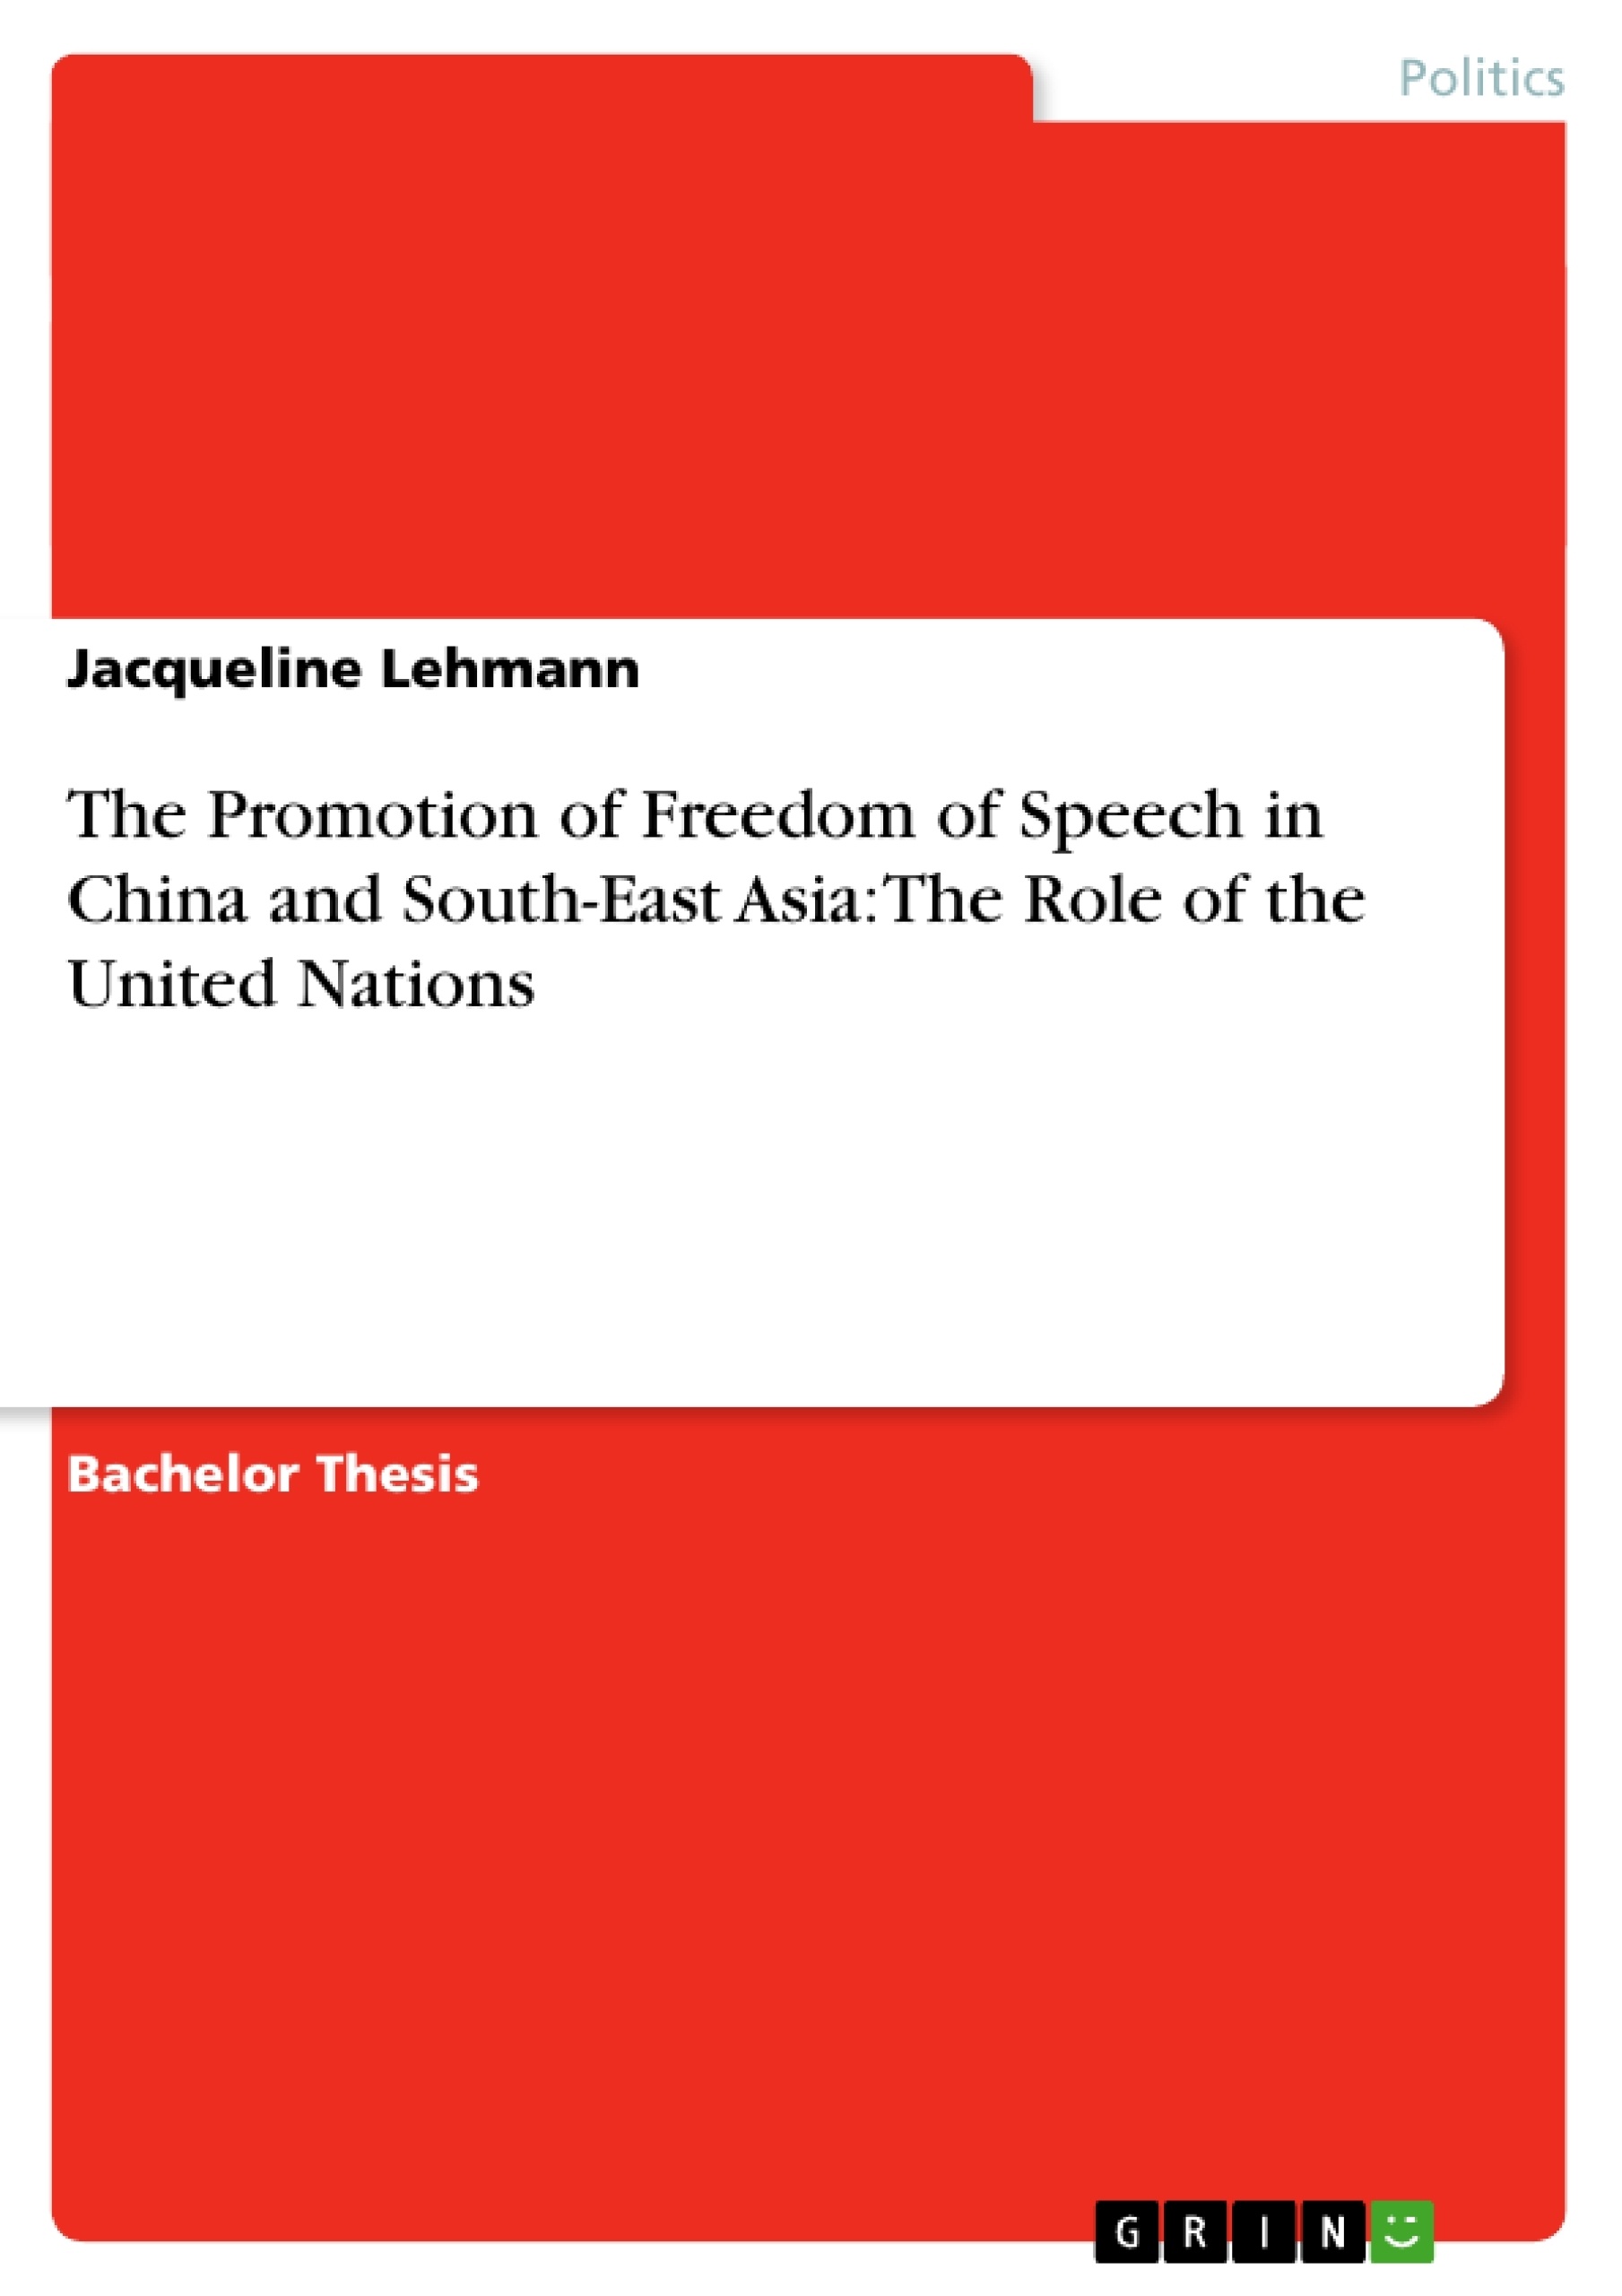 Title: The Promotion of Freedom of Speech in China and South-East Asia: The Role of the United Nations